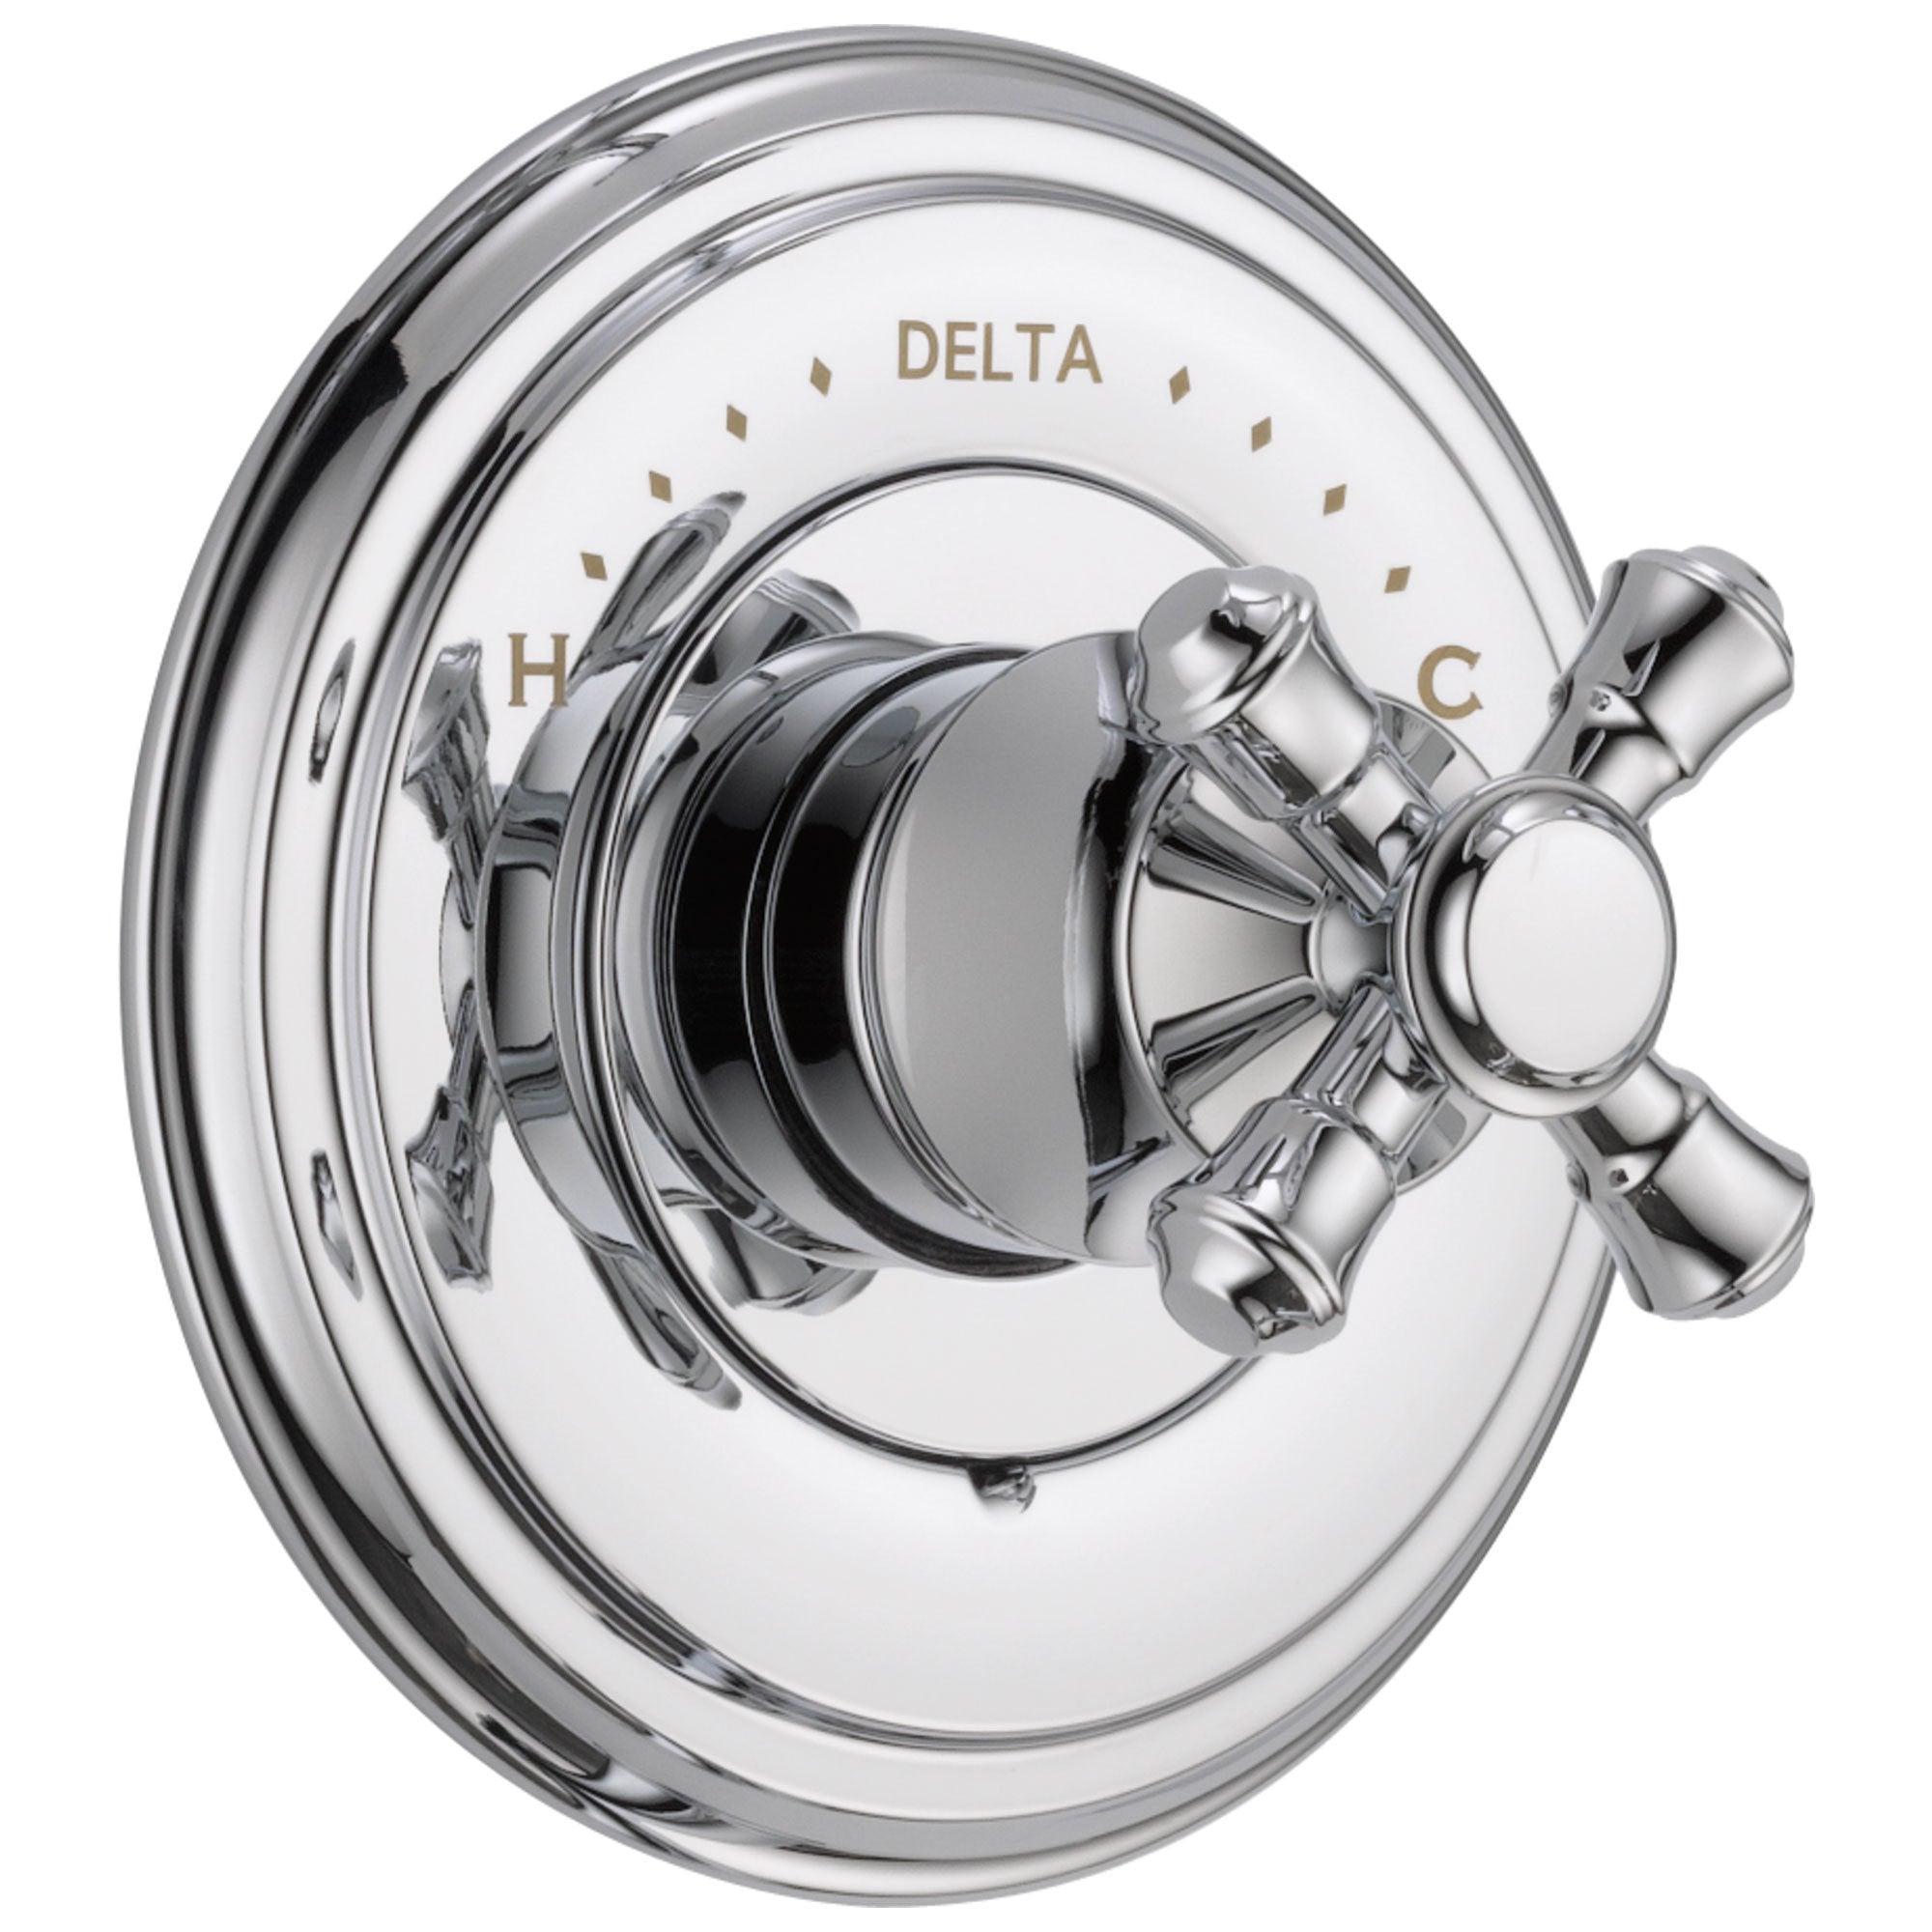 Delta Cassidy Collection Chrome Finish Monitor 14 Series Shower Faucet Control COMPLETE ITEM with Single Cross Handle and Rough-in Valve with Stops D1601V